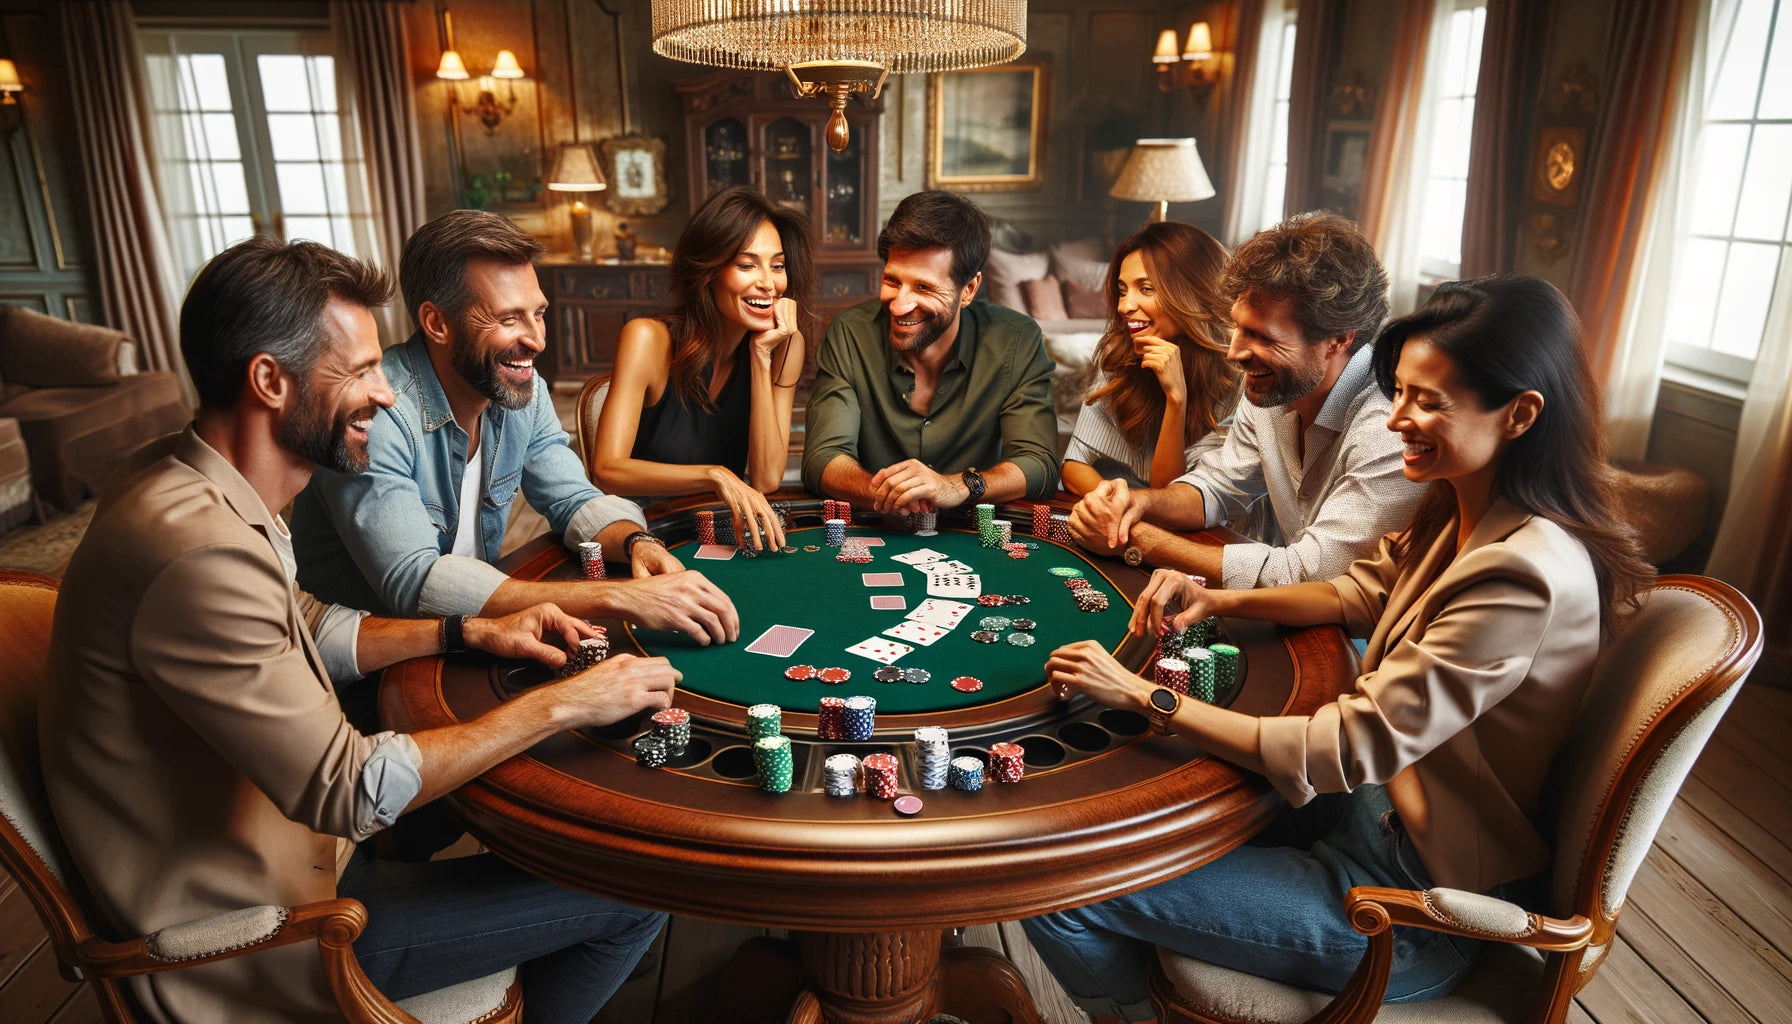 Can You Leave a Poker Table Anytime in a Casino?